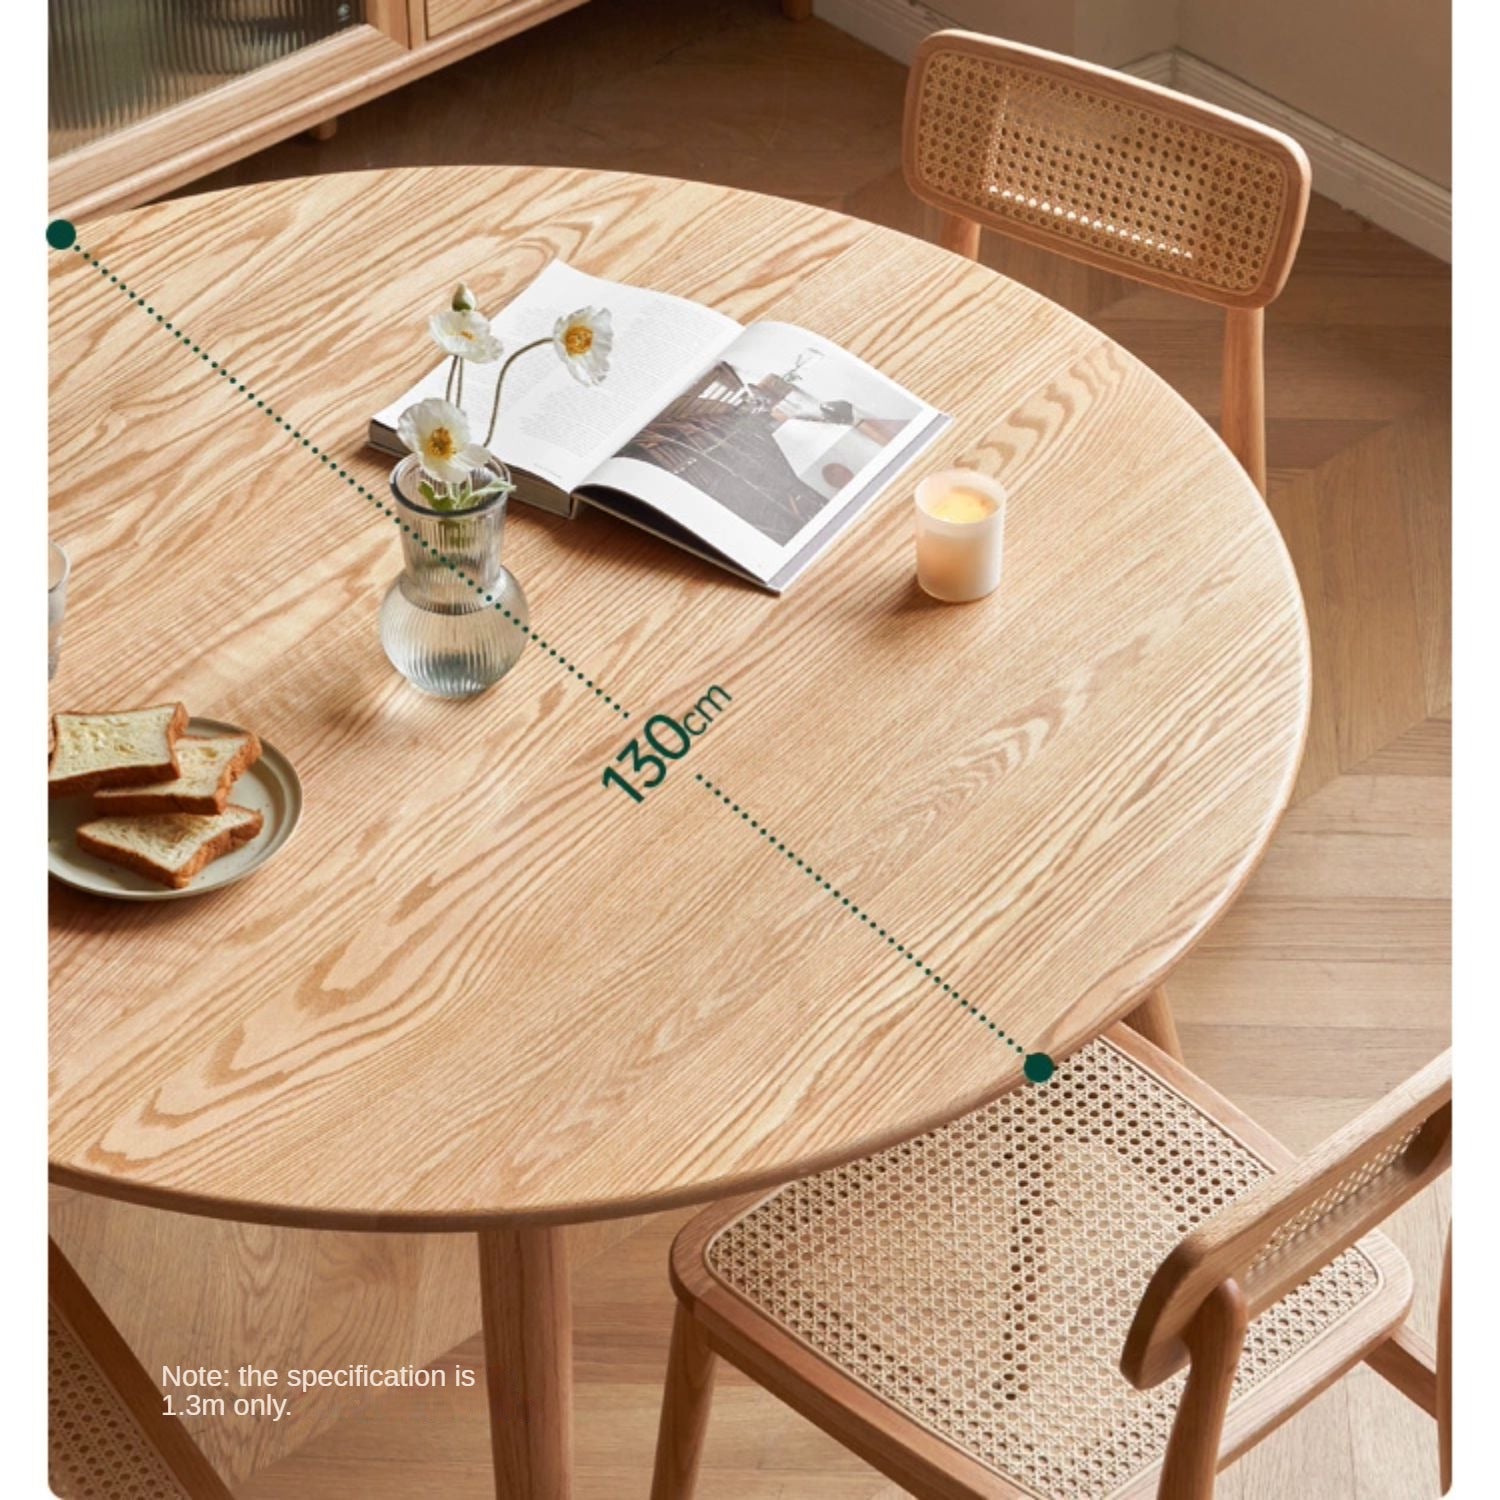 Oak Solid wood round table "